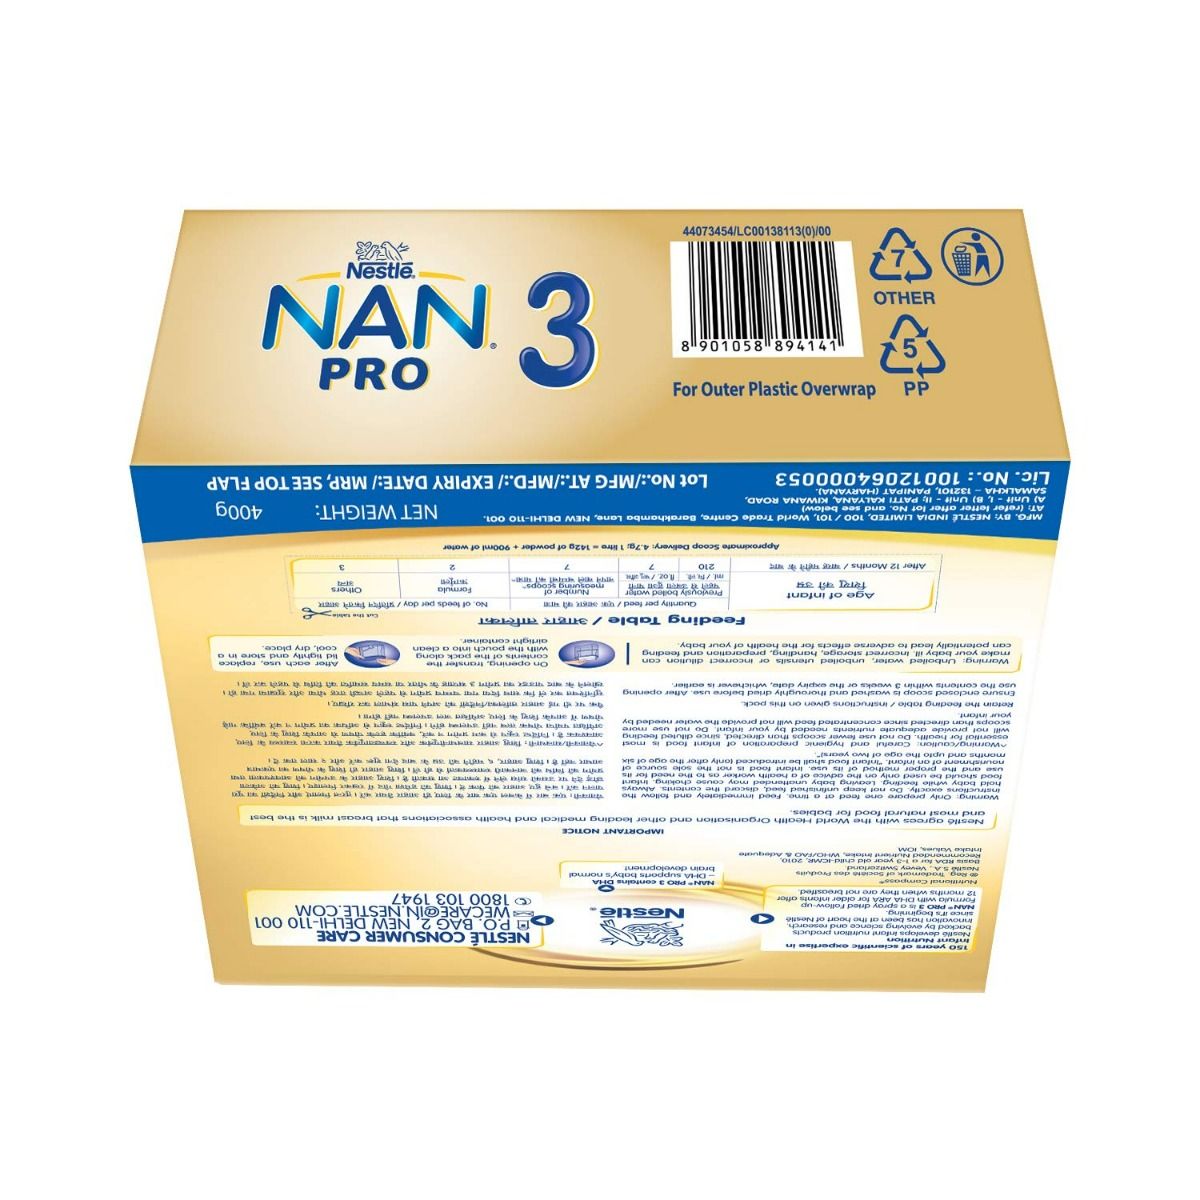 Nestle Nan Pro Follow-Up Formula Stage 3 (After 12 Months) Powder, 400 gm Refill Pack, Pack of 1 